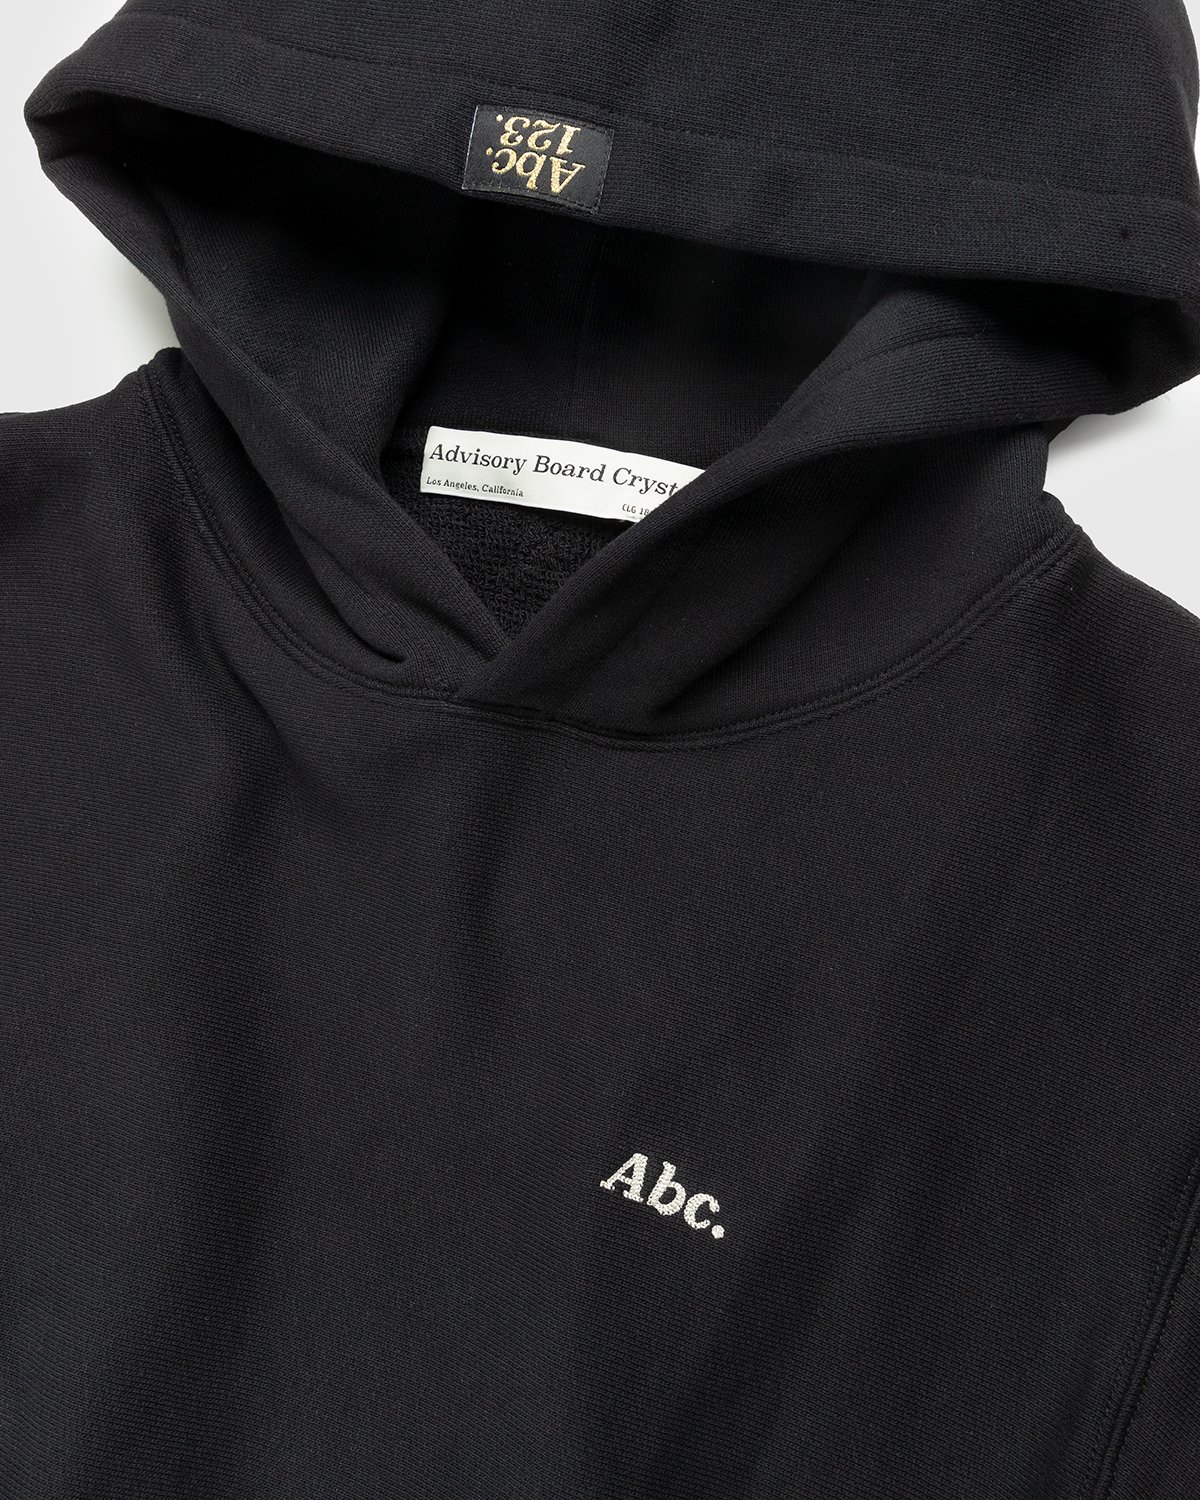 Abc. - Pullover Hoodie Anthracite - Clothing - Black - Image 5